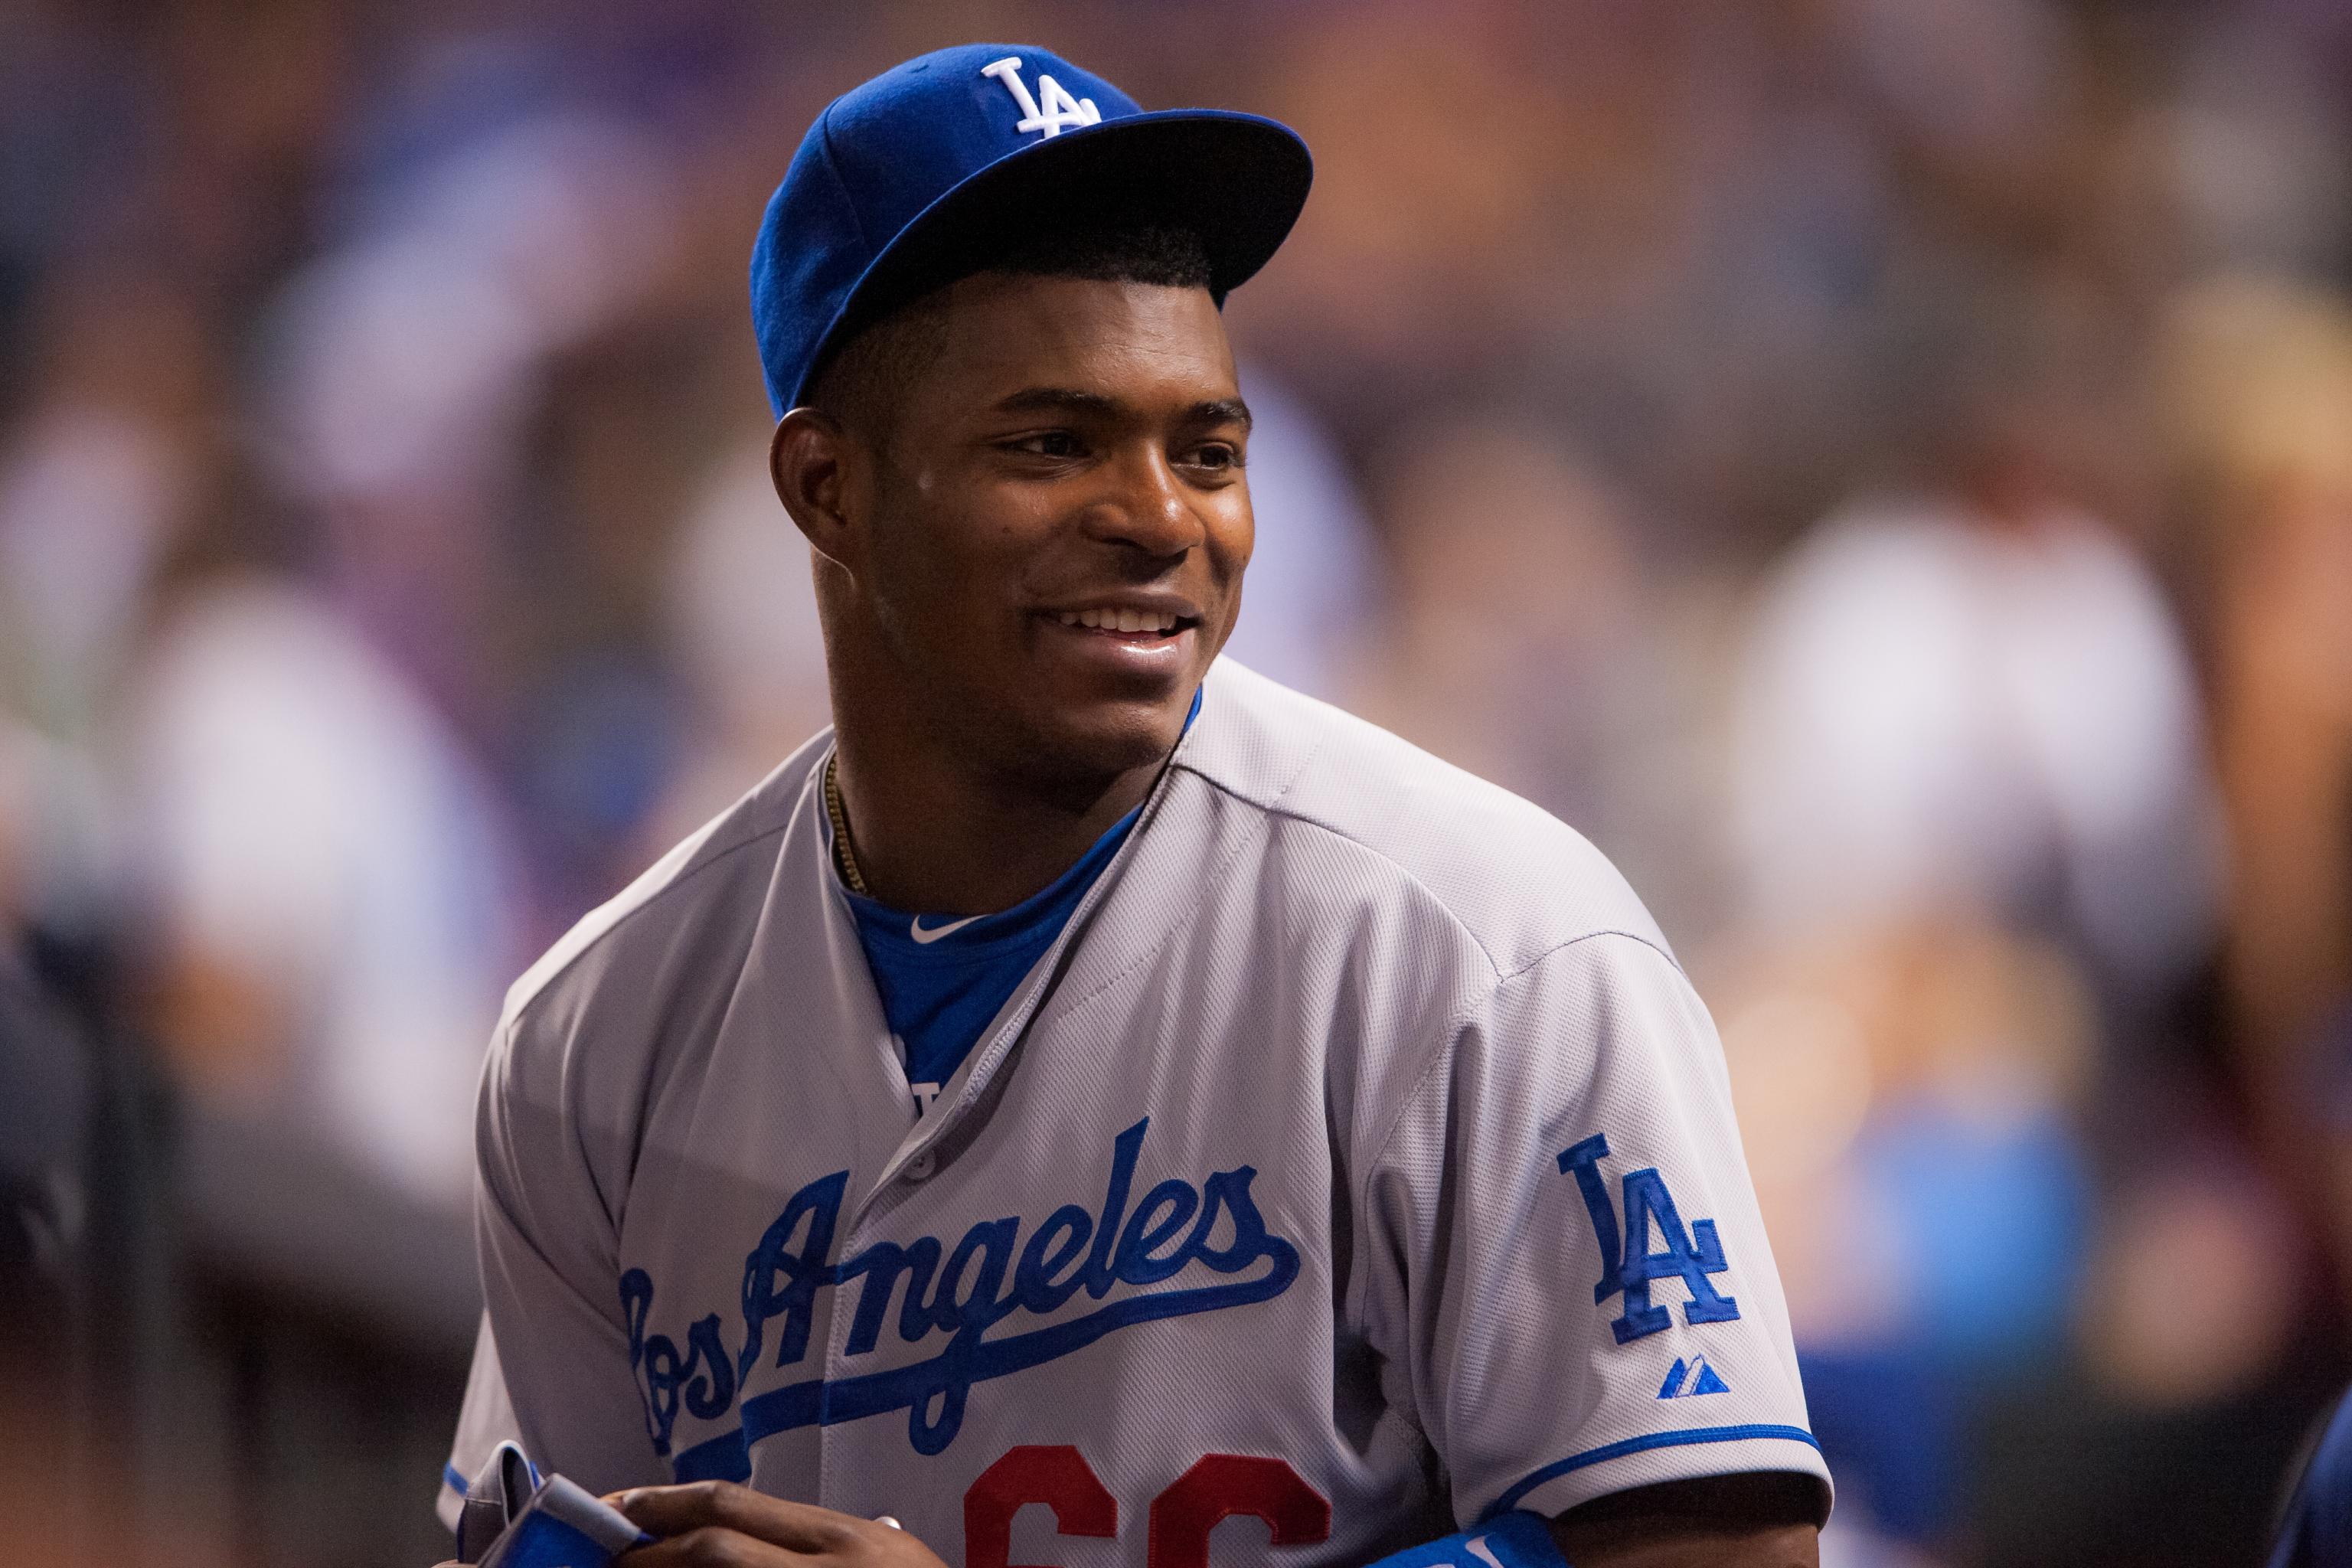 Heroes' manager not yet concerned about Yasiel Puig, on and off the field